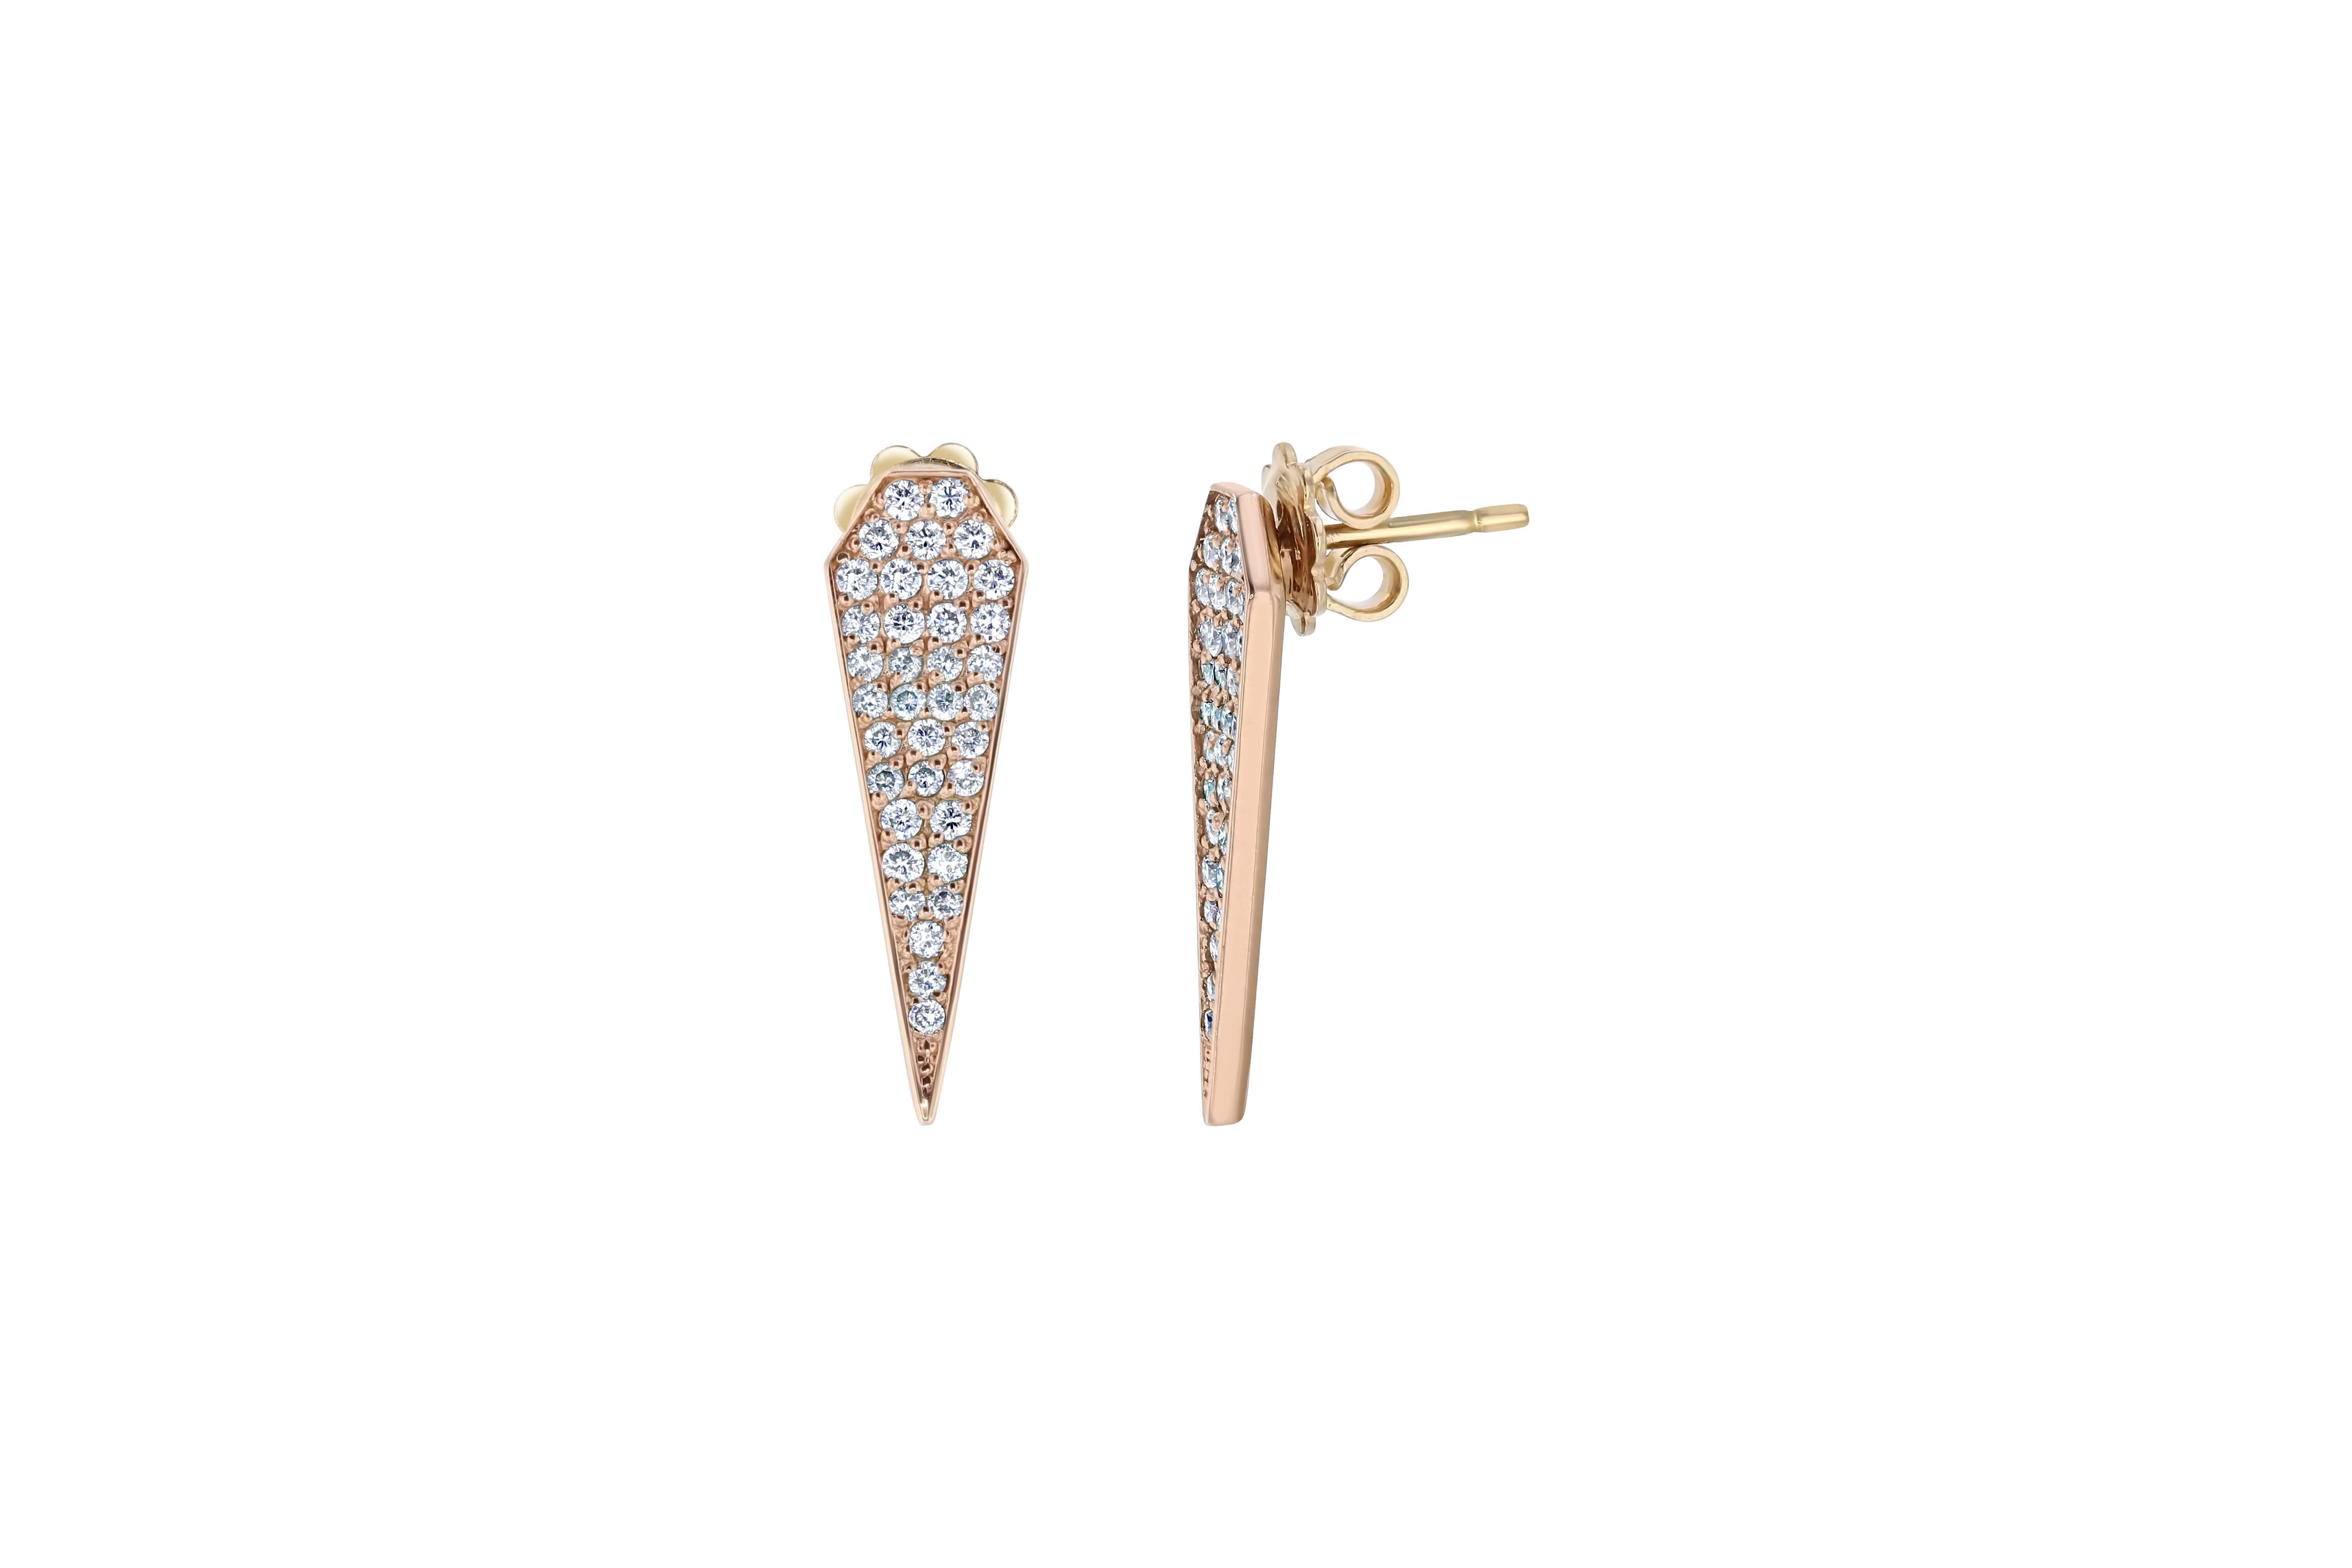 Affordable luxury at its best!  This classic design of diamond drop earrings have 72 Round Cut Diamonds that weigh 0.82 carats (Clarity: VS2, Color: H)  The length is a little less than 1.0 inch and comes with push back backings.  They are made in